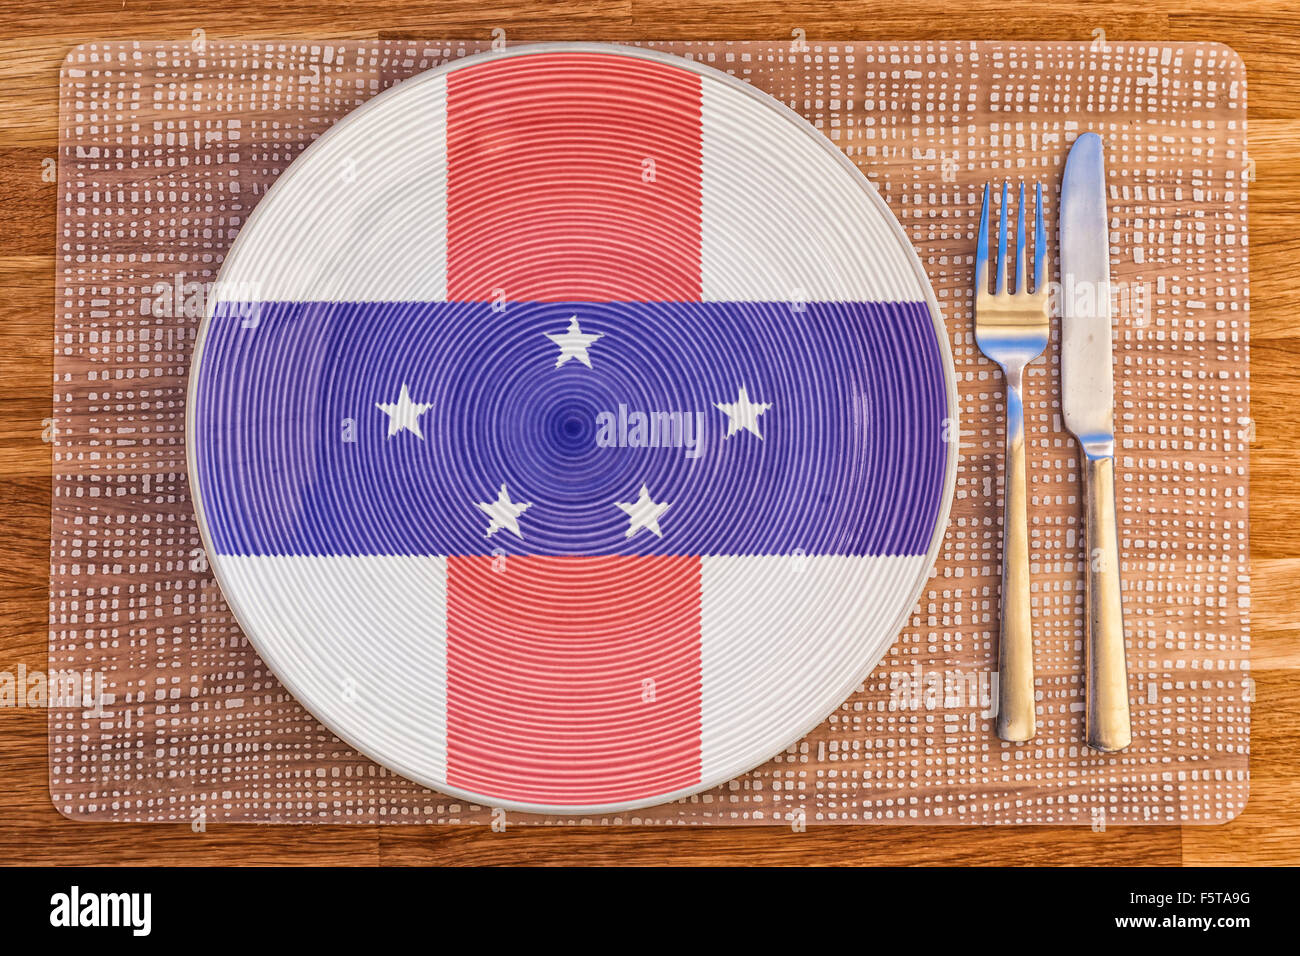 Dinner plate with the flag of Netherlands Antilles on it for your international food and drink concepts. Stock Photo